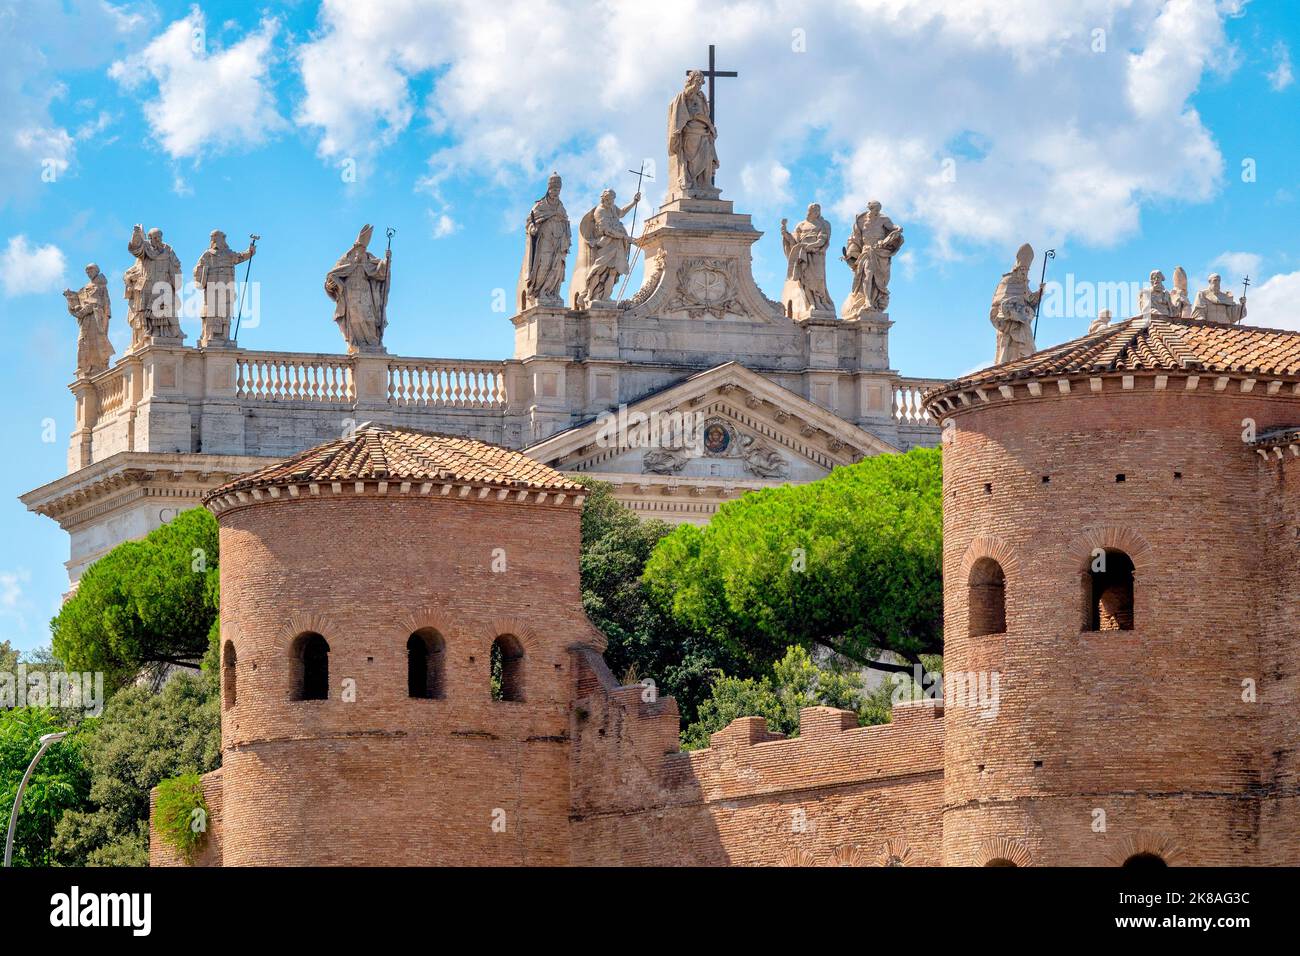 Towers of the Aurelian walls near Porta San Giovanni with the facade of the Archbasilica of San Giovanni in Laterano in the background, Rome, Italy Stock Photo